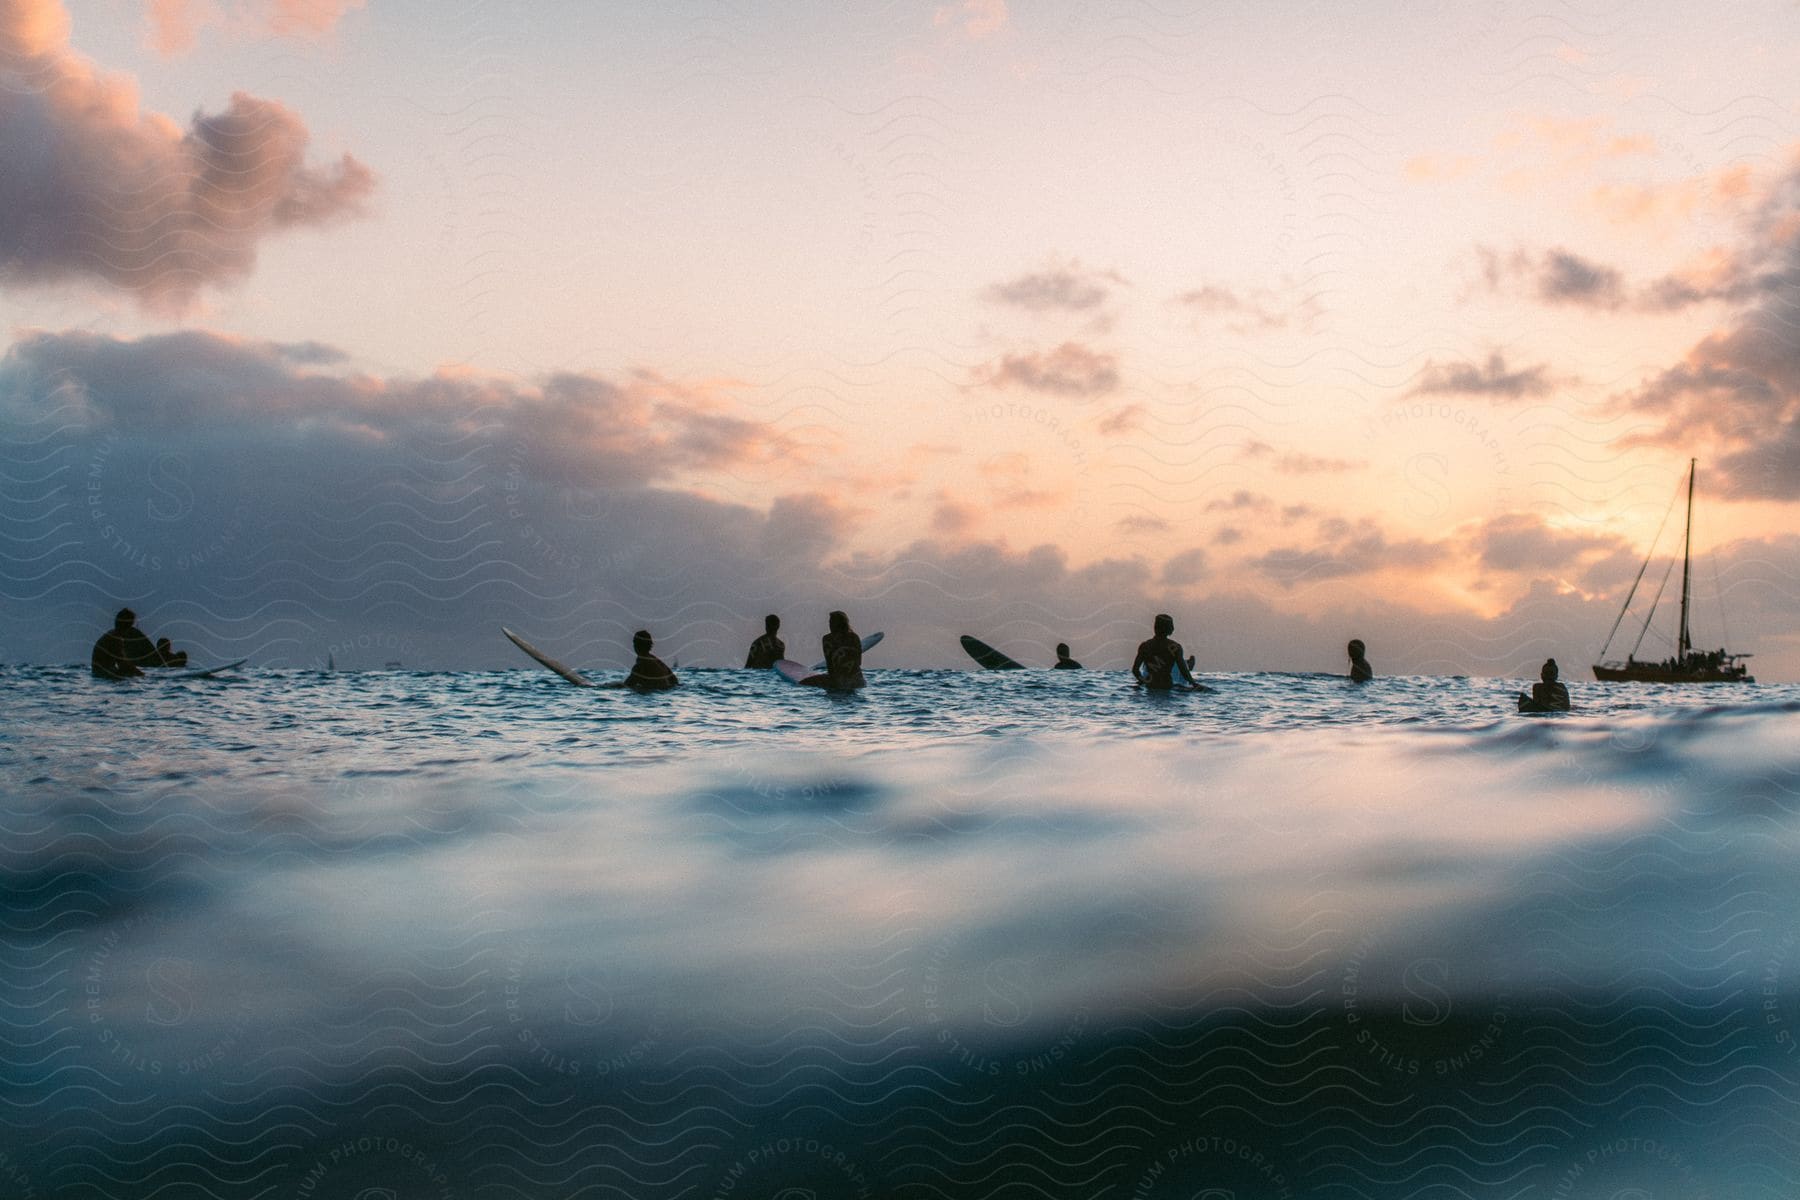 People riding surfboards in the ocean at sunset with a sailboat in the background